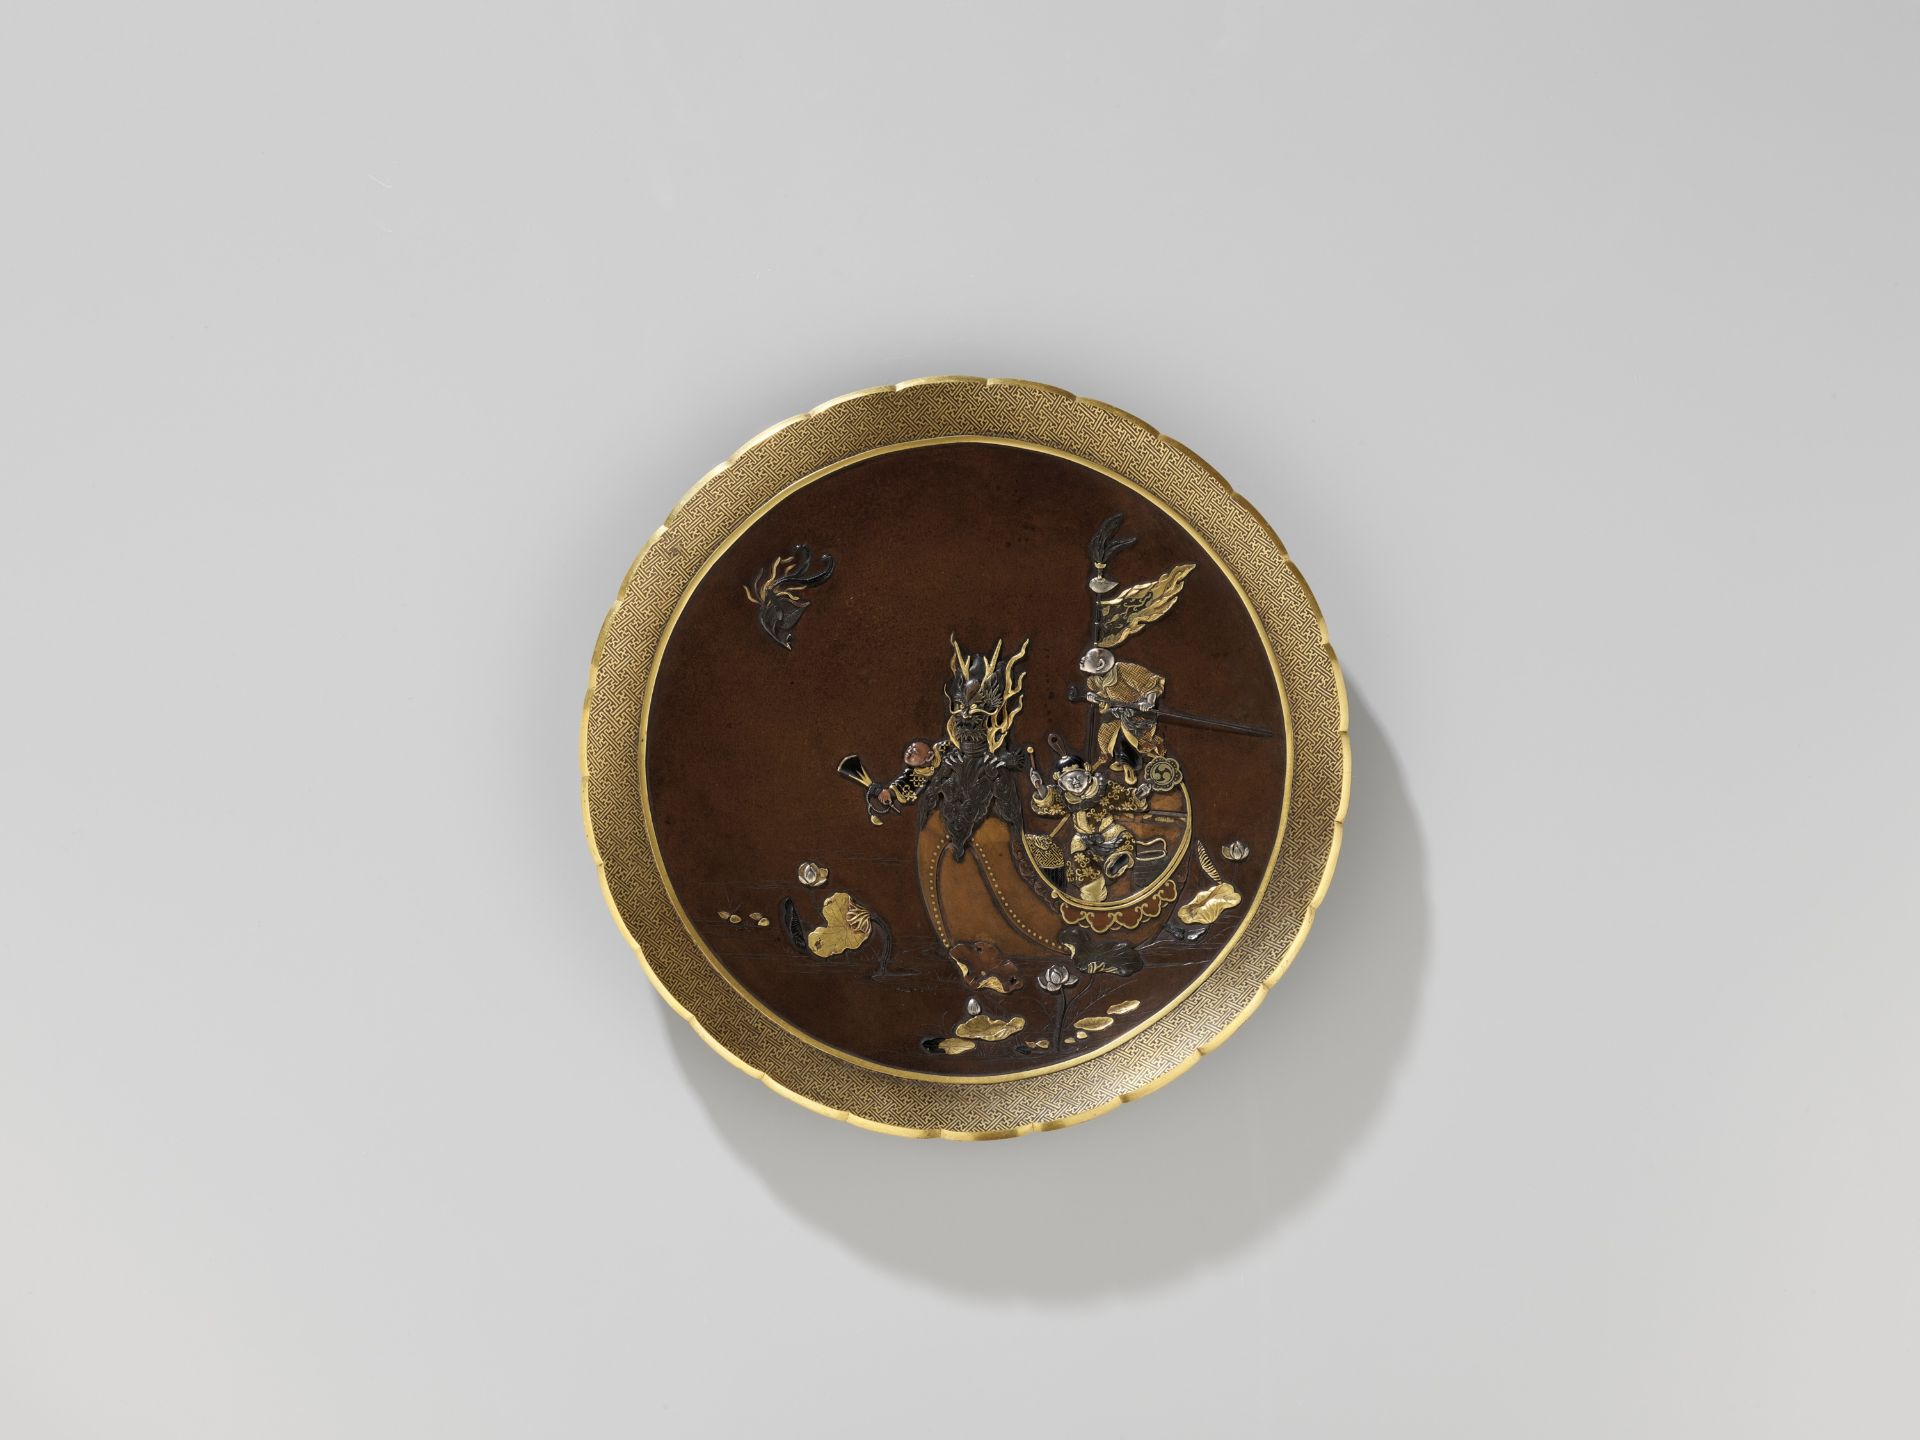 INOUE: A SUPERB INLAID BRONZE DISH DEPICTING BOYS ON A DRAGON BOAT - Image 3 of 6